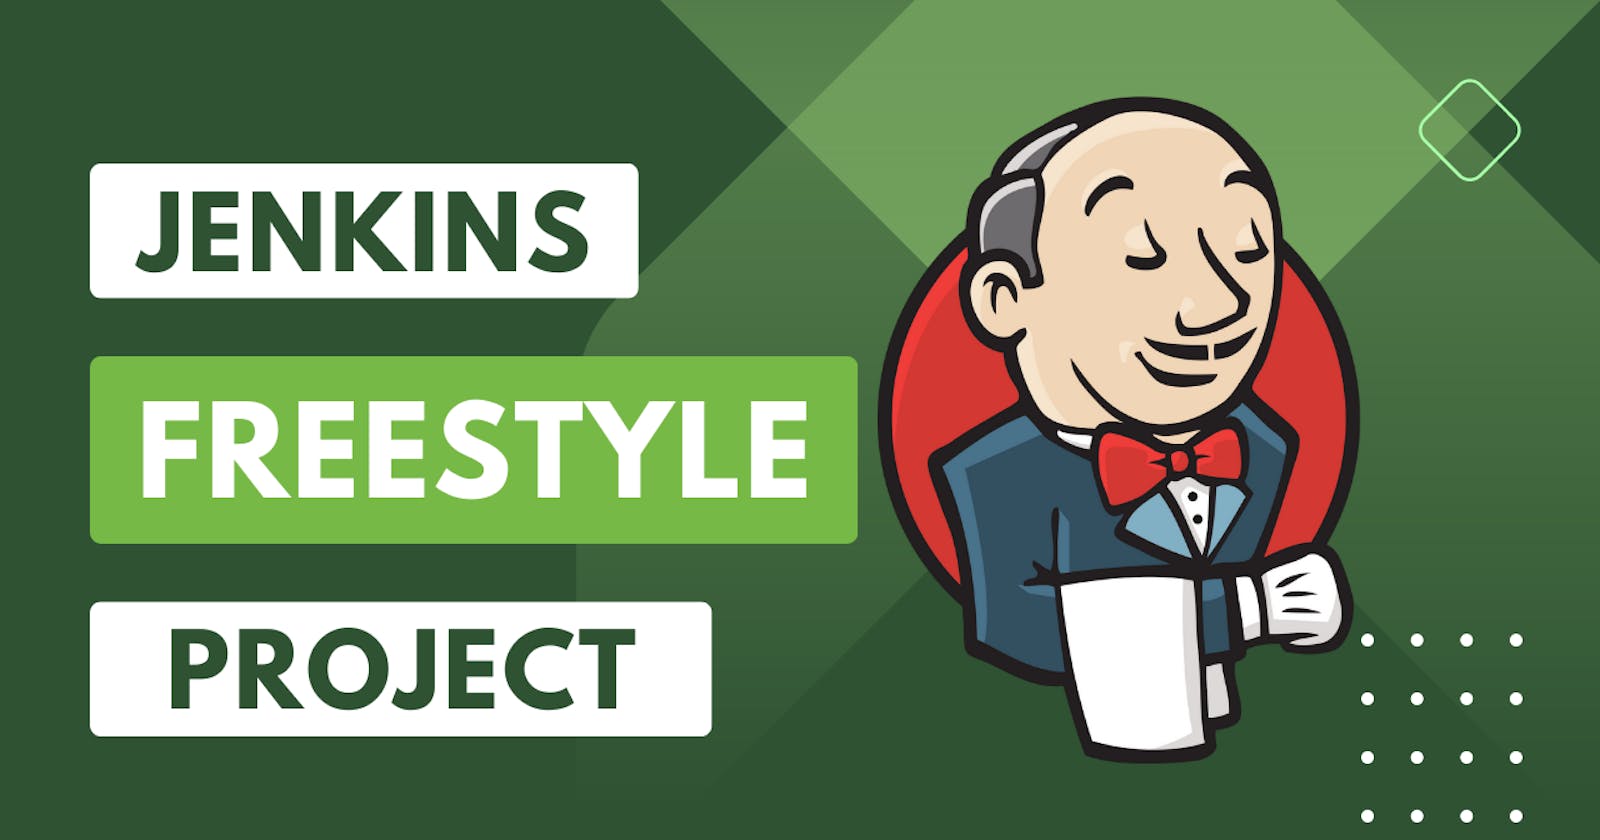 Jenkins Freestyle Project for DevOps Engineers